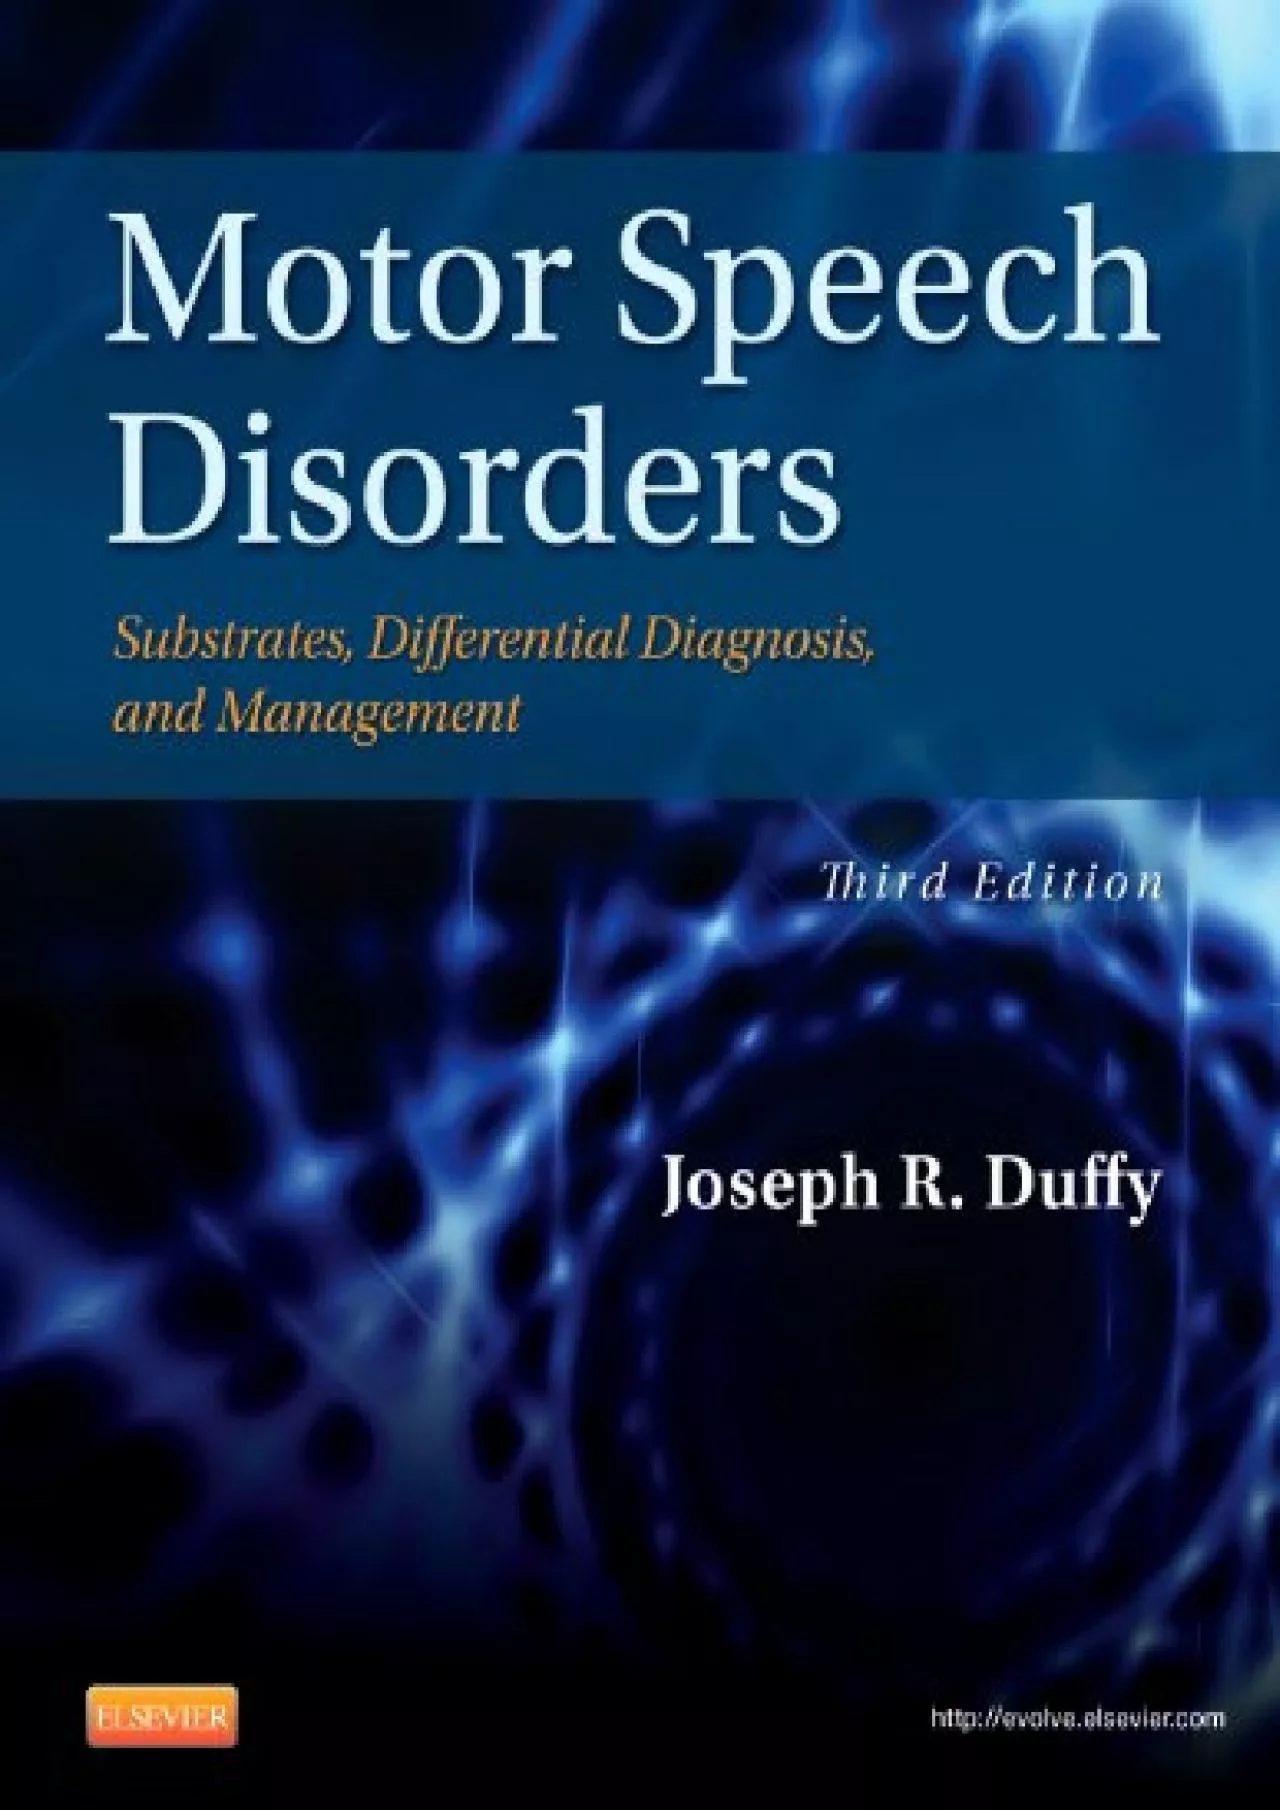 (BOOK)-Motor Speech Disorders: Substrates, Differential Diagnosis, and Management